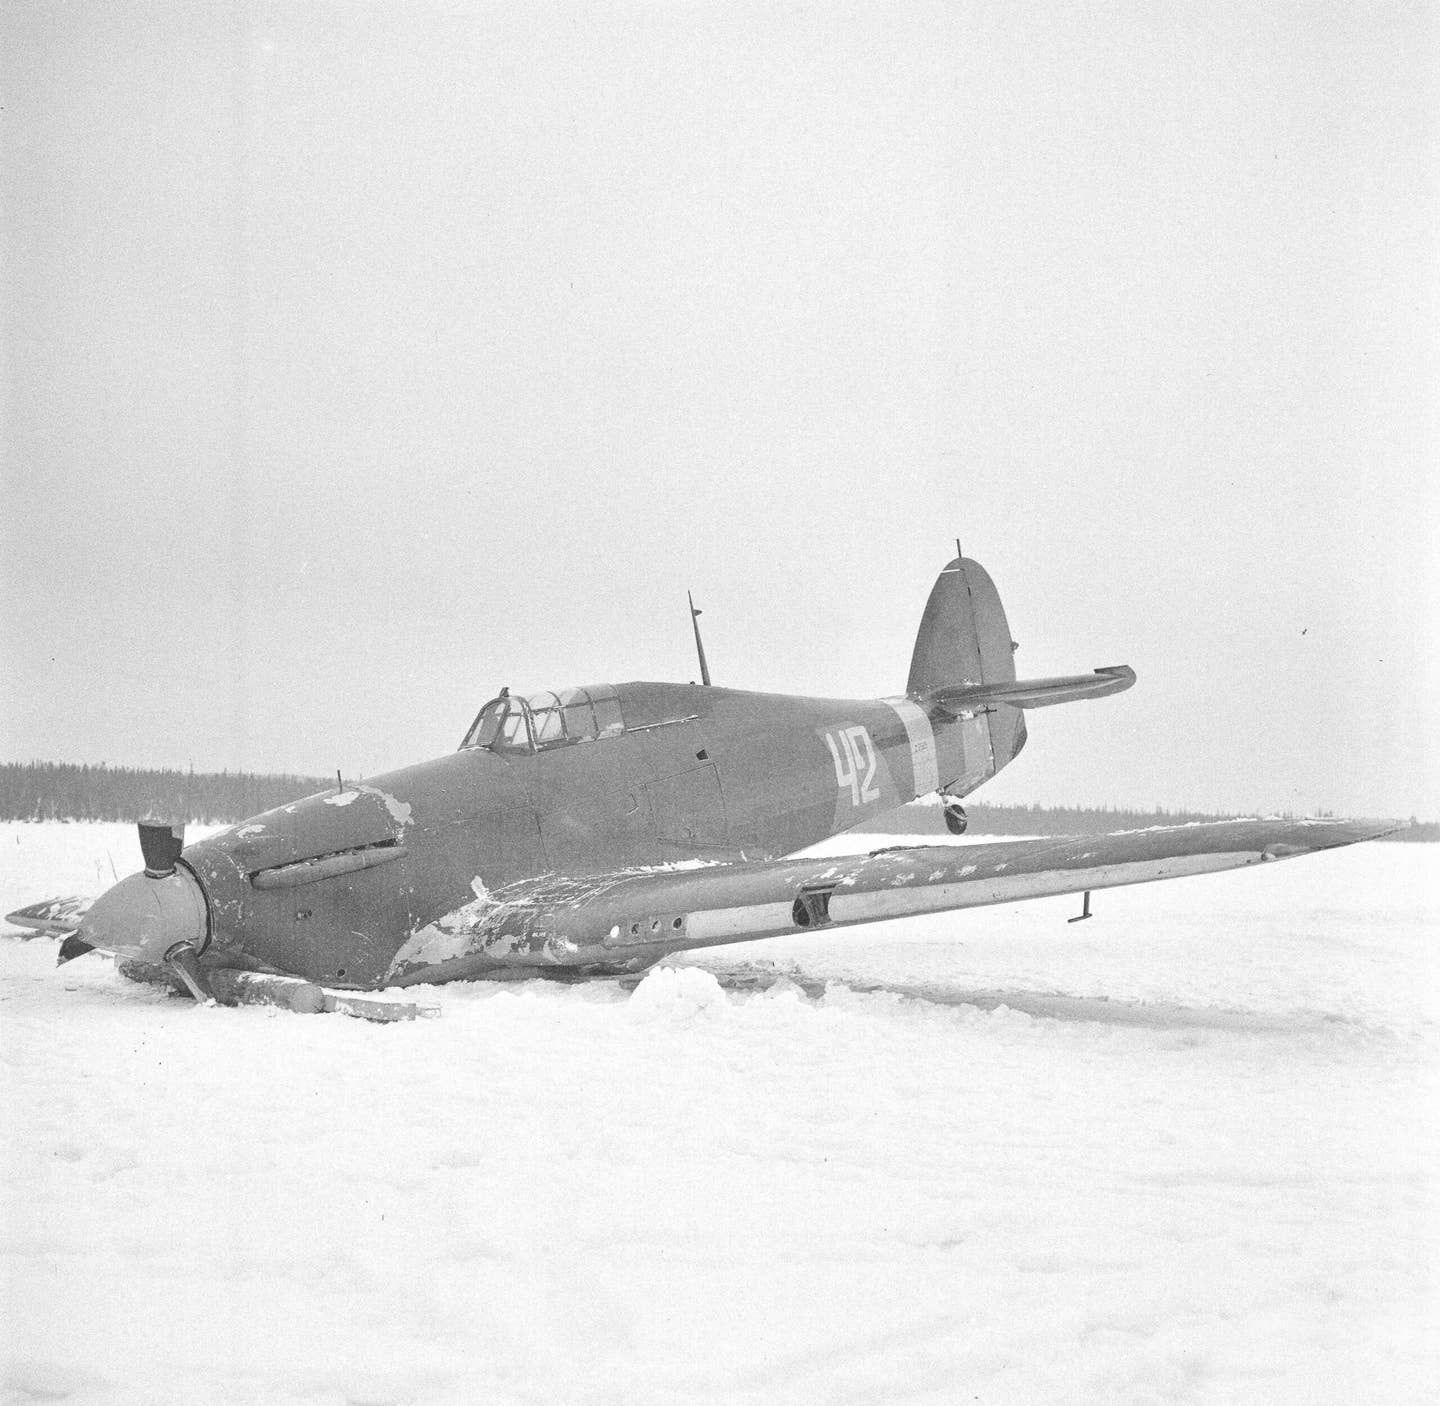 A Soviet Hurricane that was shot down during action against Finnish forces in March 1942. Both Finland and the Soviet Union operated Hurricanes in World War II. <em>SA-kuva/Wikimedia Commons</em>